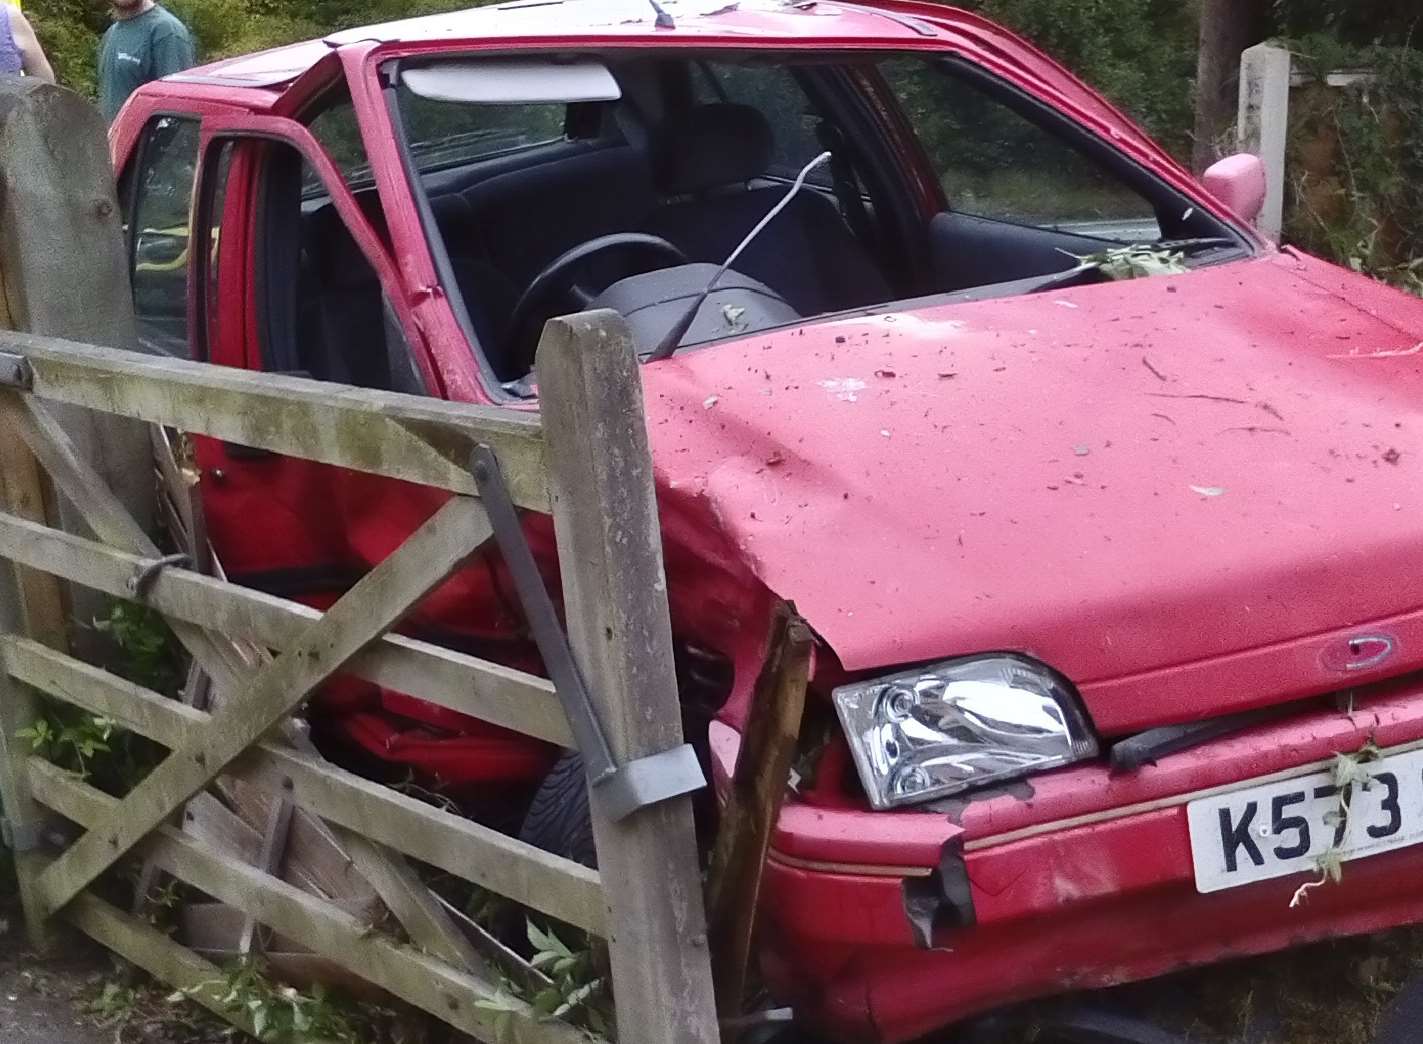 The wreckage of a Ford Fiesta